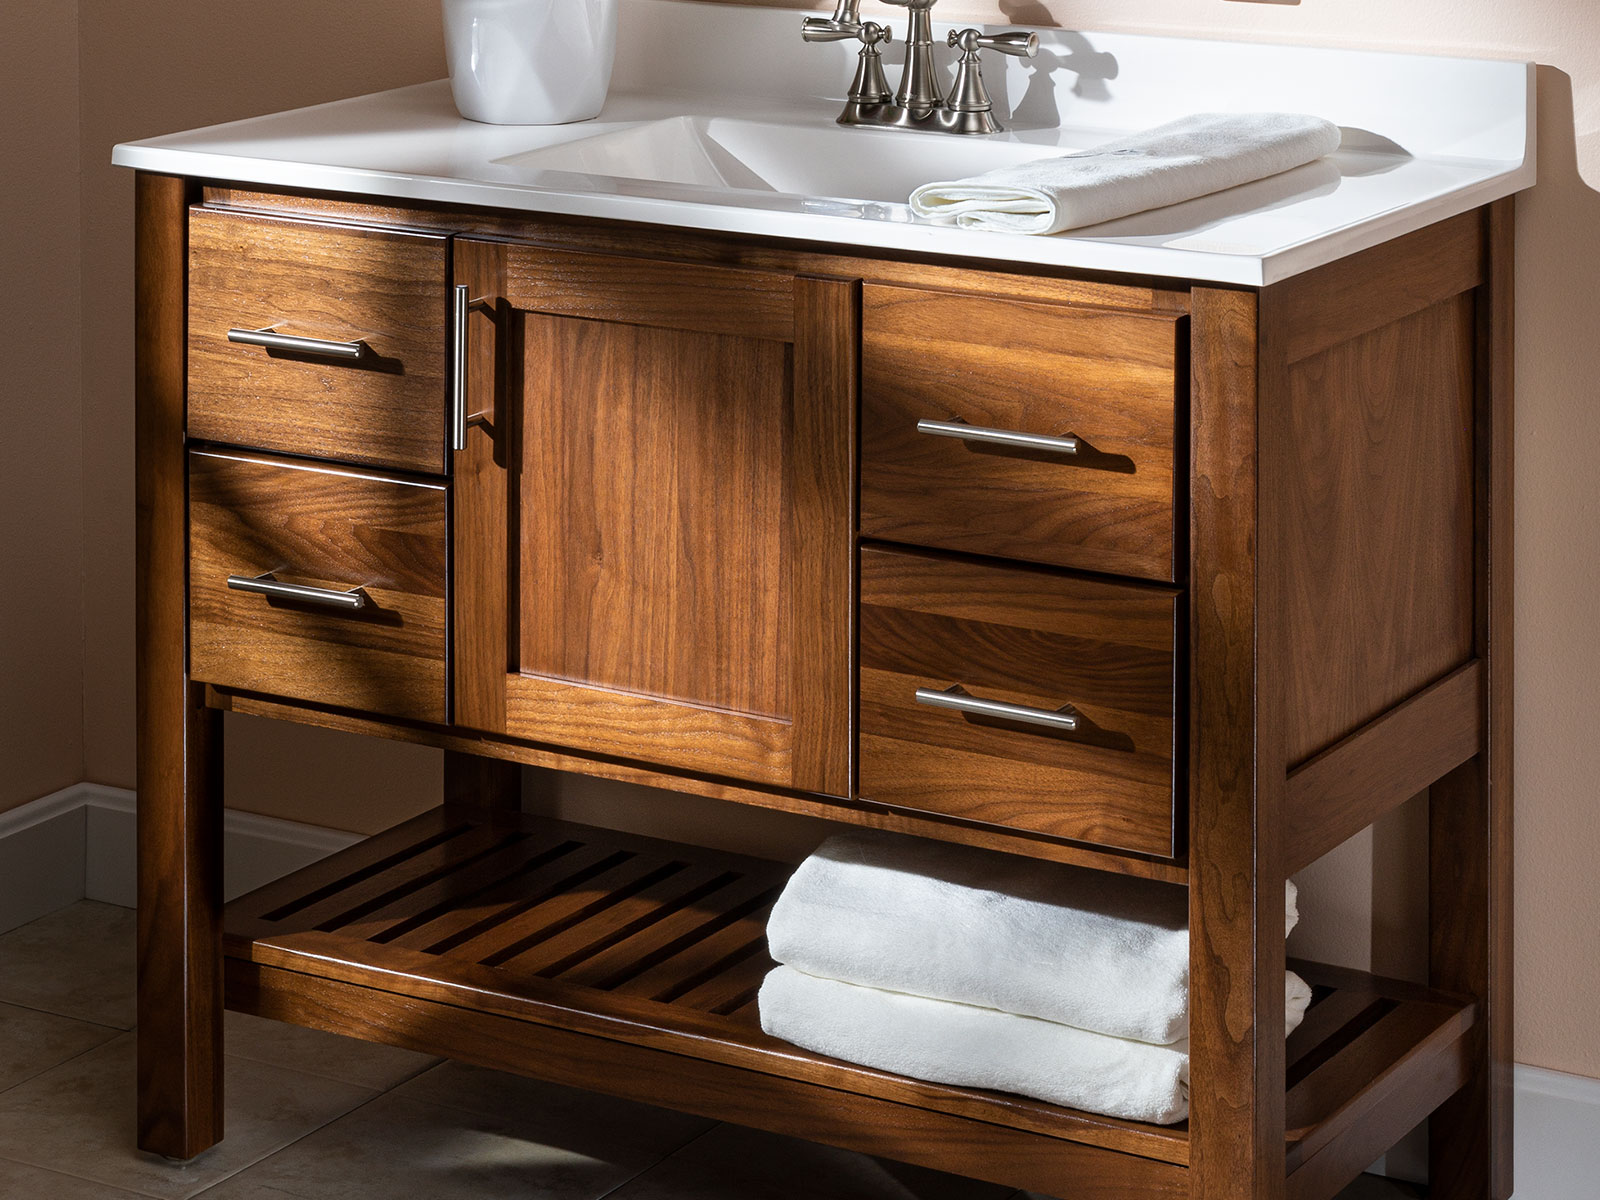 Bath Vanities And Cabinetry, Unfinished Knotty Alder Bathroom Vanity